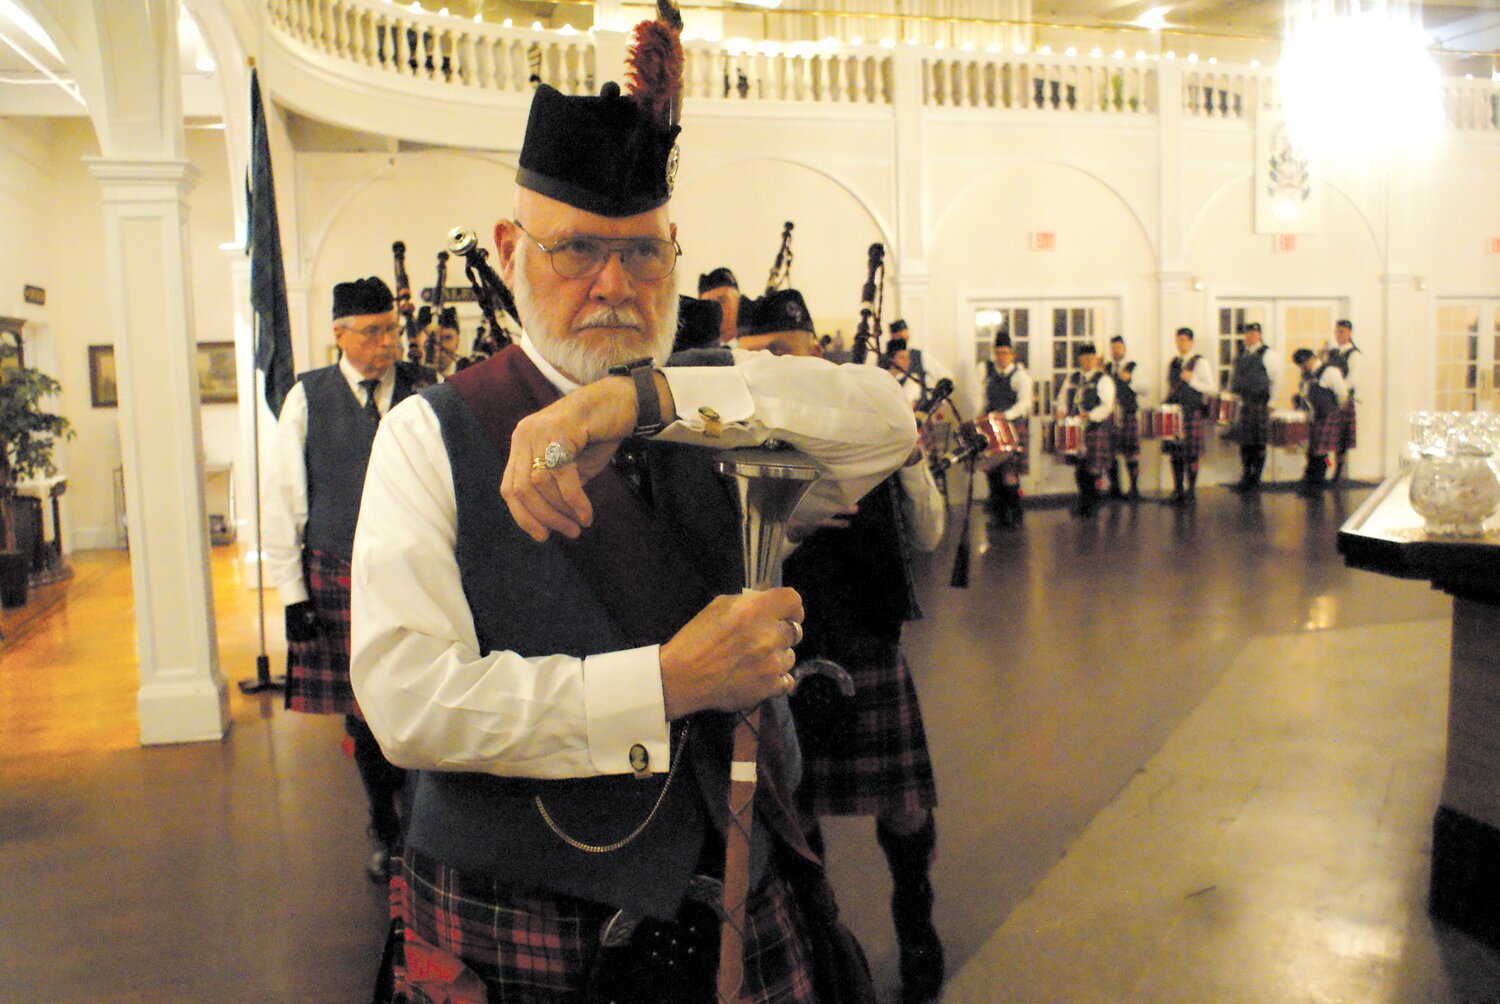 Scottish cultural event at Robert Burns Dinner Dance: The Rhode Island Highlanders stand ready with drum major in the lead in the hall at Rhodes on the Pawtuxet. The sixtieth annual Robert Burns Dinner Dance celebrates the Scottish poet Robert Burns, writer of the famous Auld Lang Syne. See page 10 for more photos. (Cranston Herald photo by Steve Popiel)